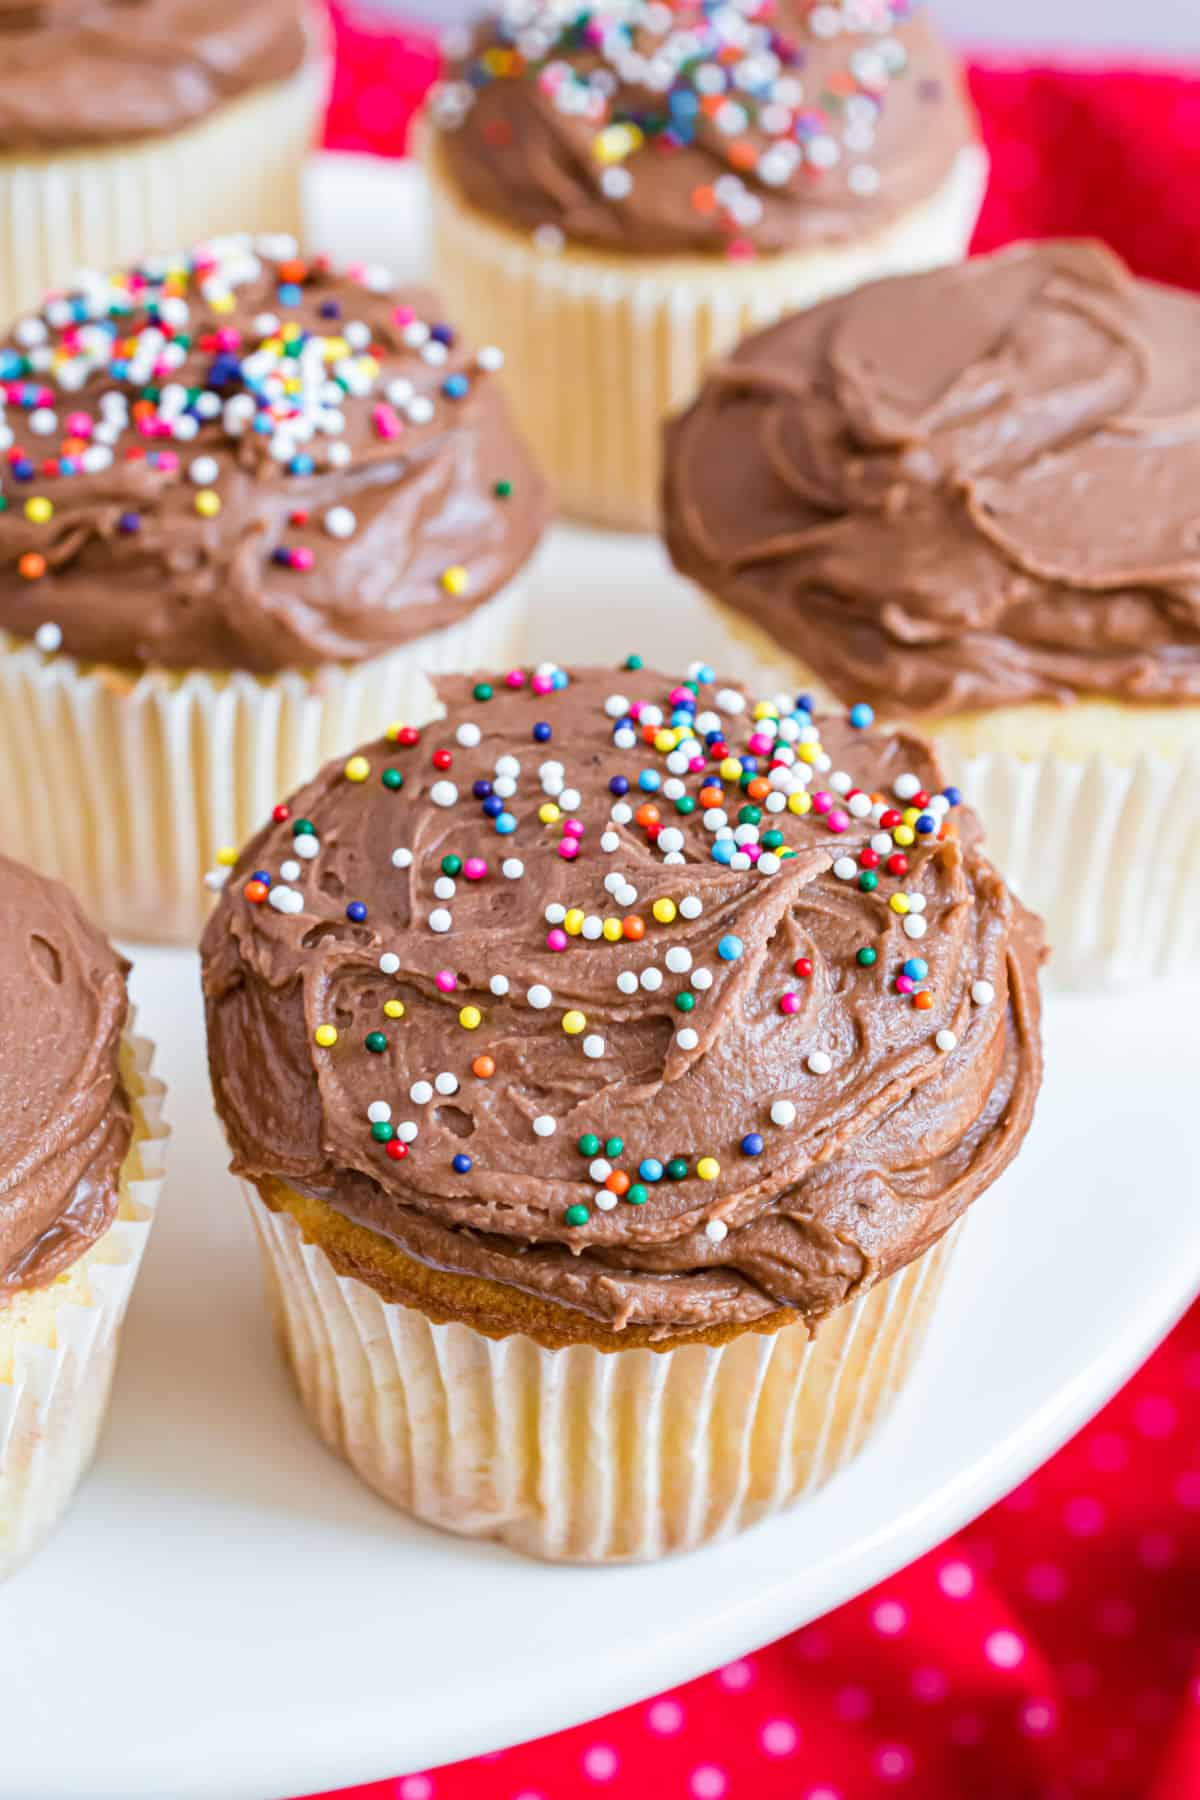 Yellow cupcakes with chocolate frosting served on white cake platter.